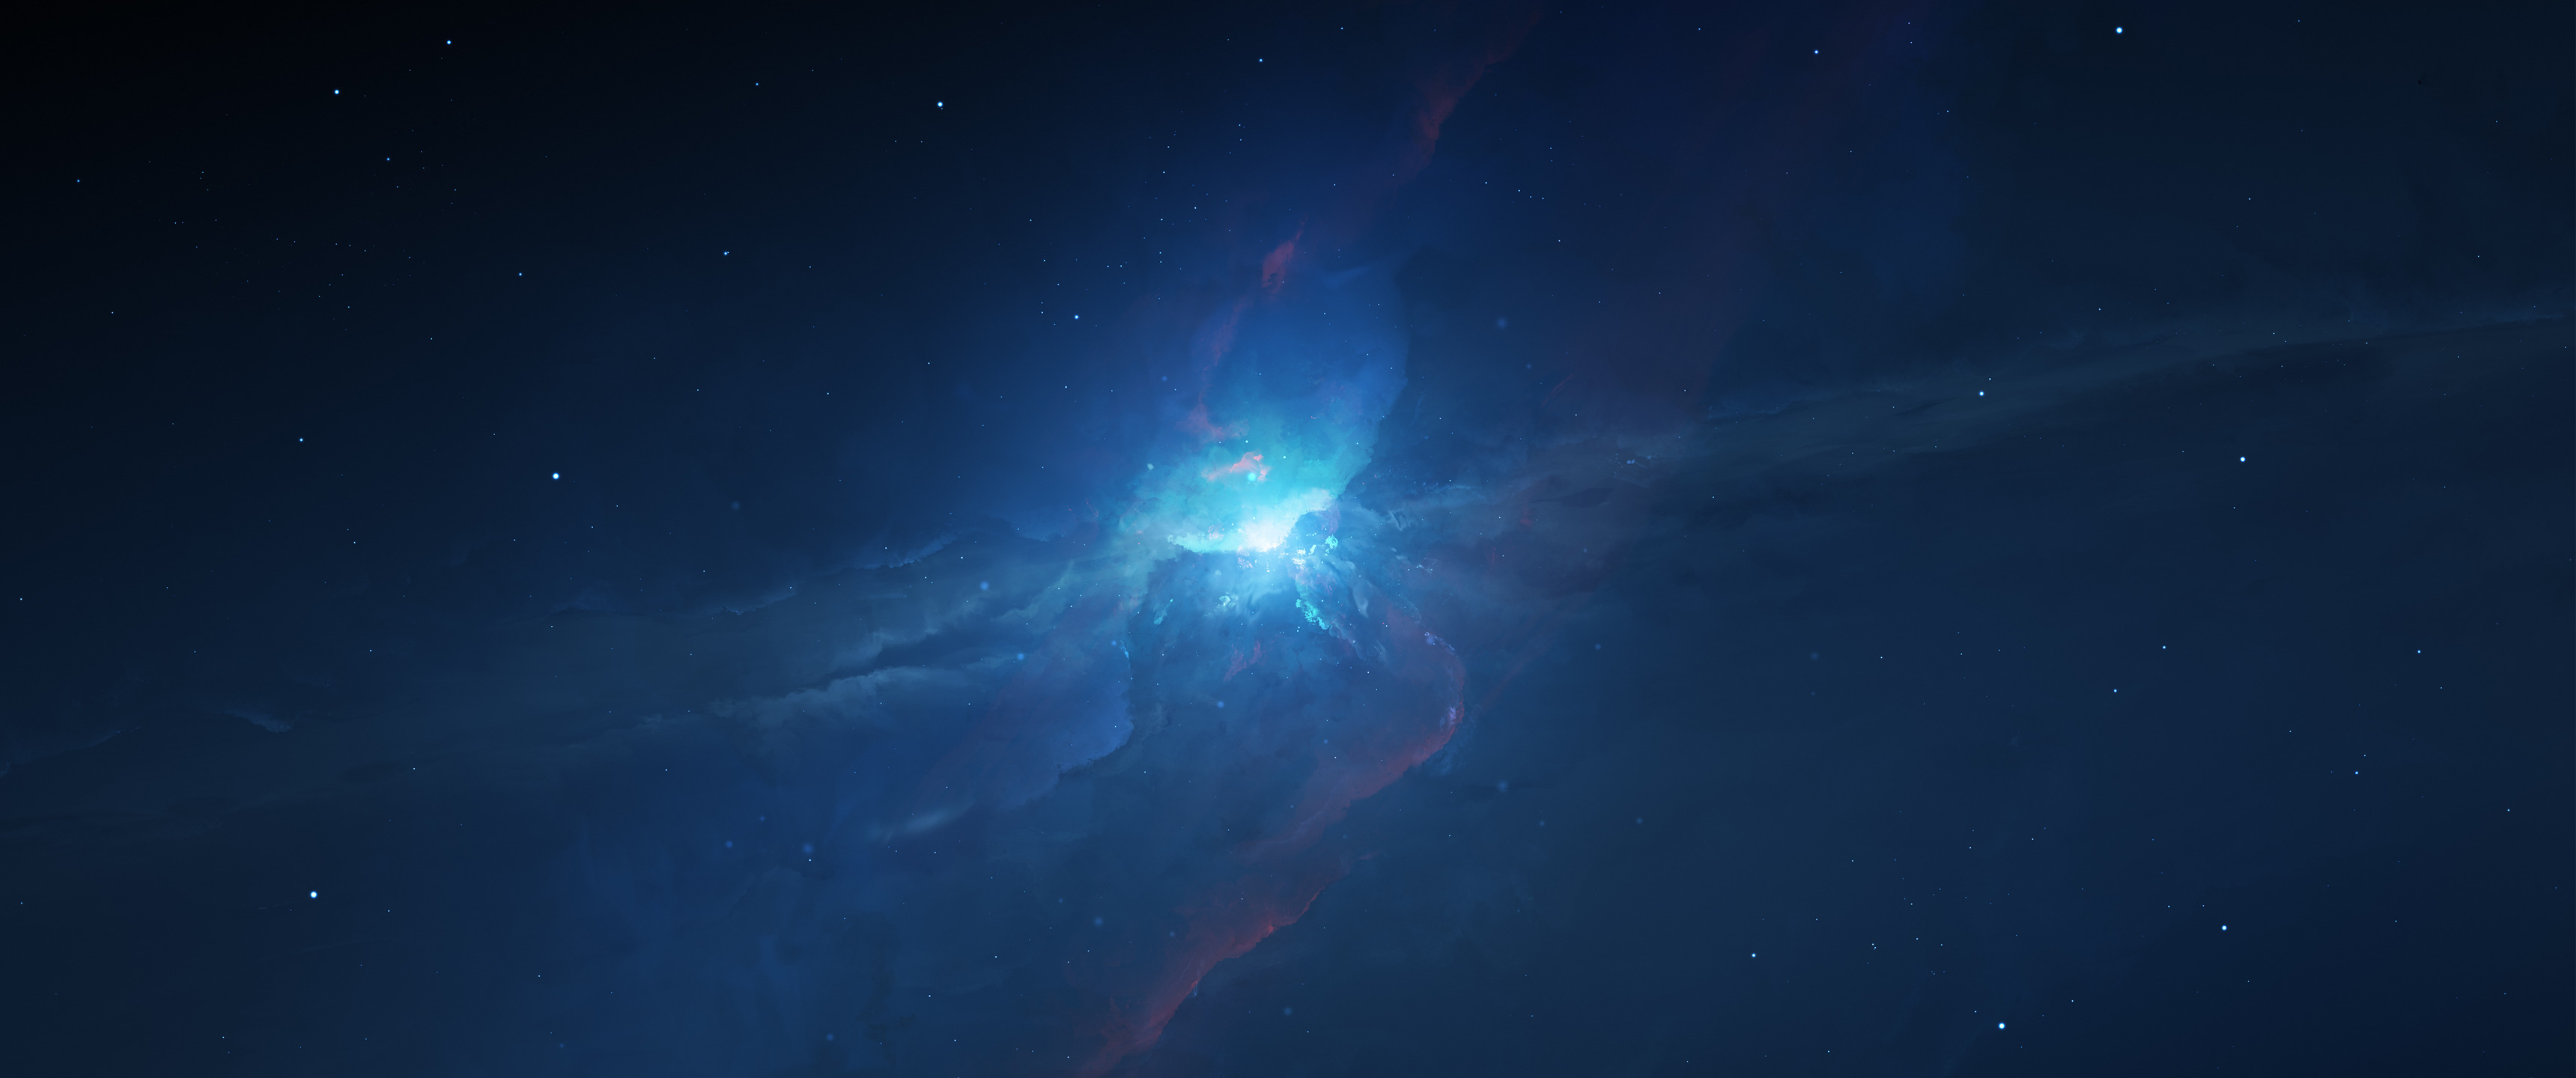 ultrawide, Astrophotography, Space, Blue Wallpaper